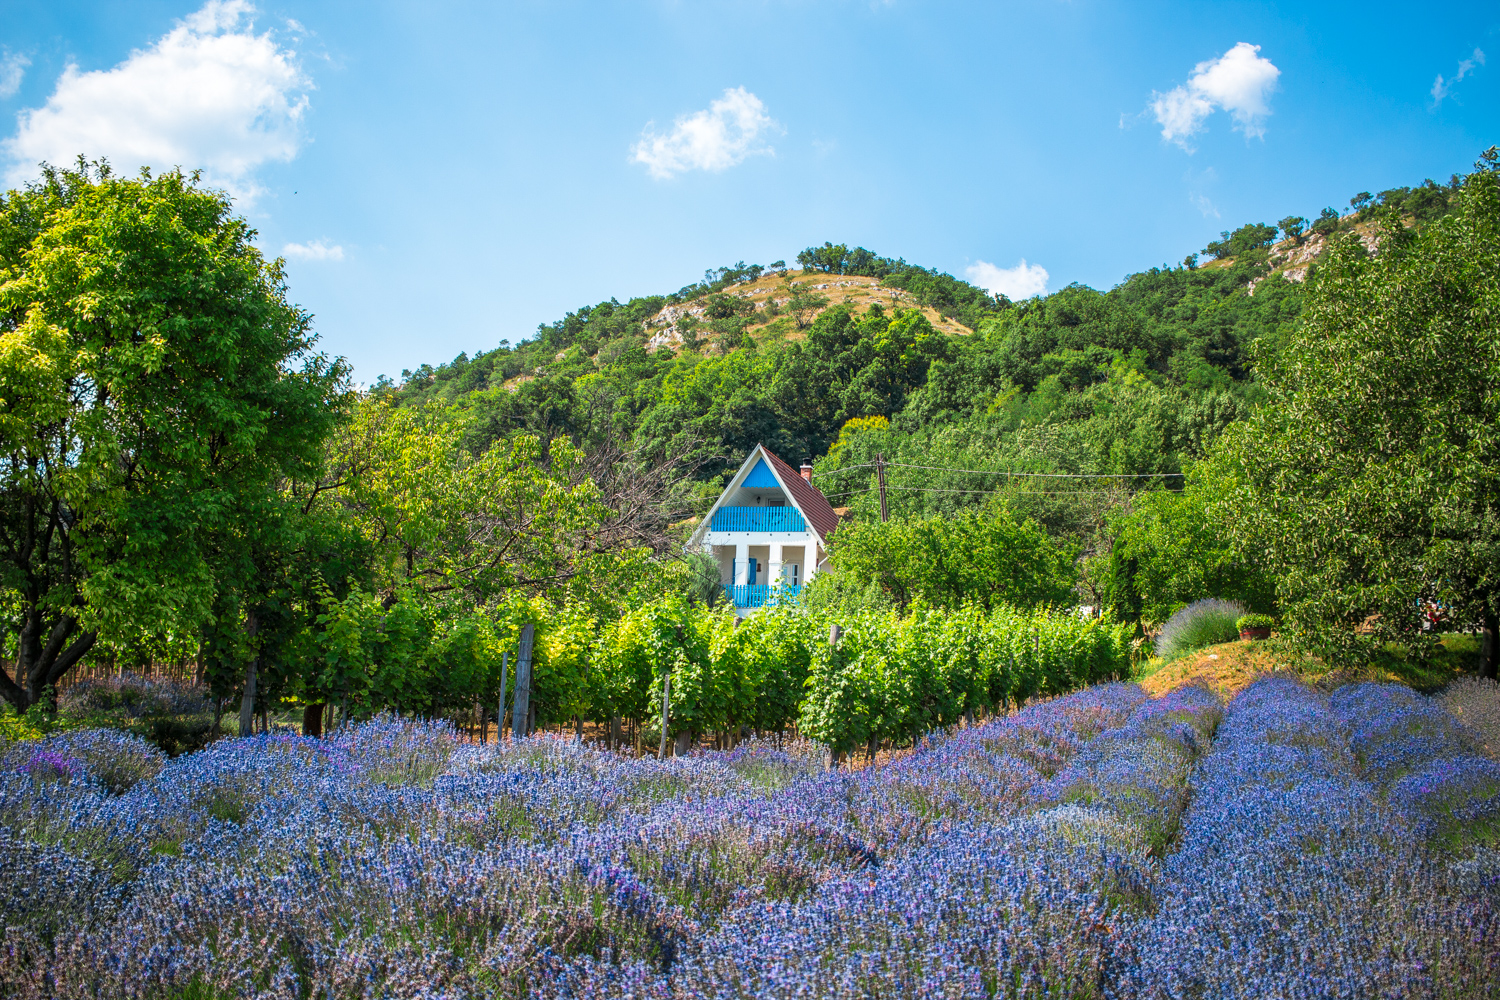 Catherine’s Vineyard Cottages nestle in the beautiful scenery of the Mor wine region